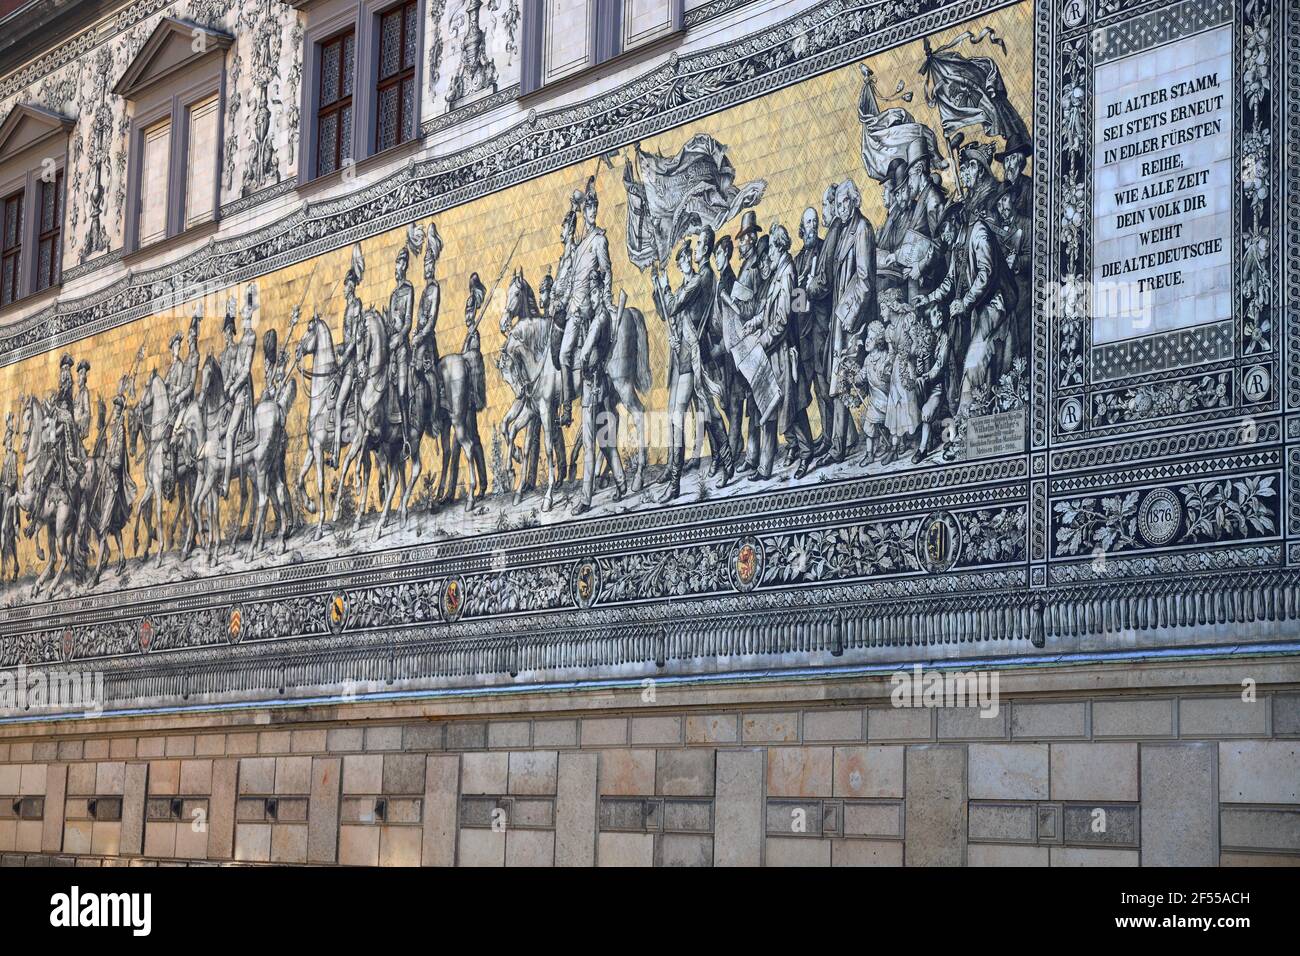 The Fürstenzug - the Saxon sovereigns depicted in Meissen porcelain. Dresden, Saxony, Germany, Europe. Stock Photo